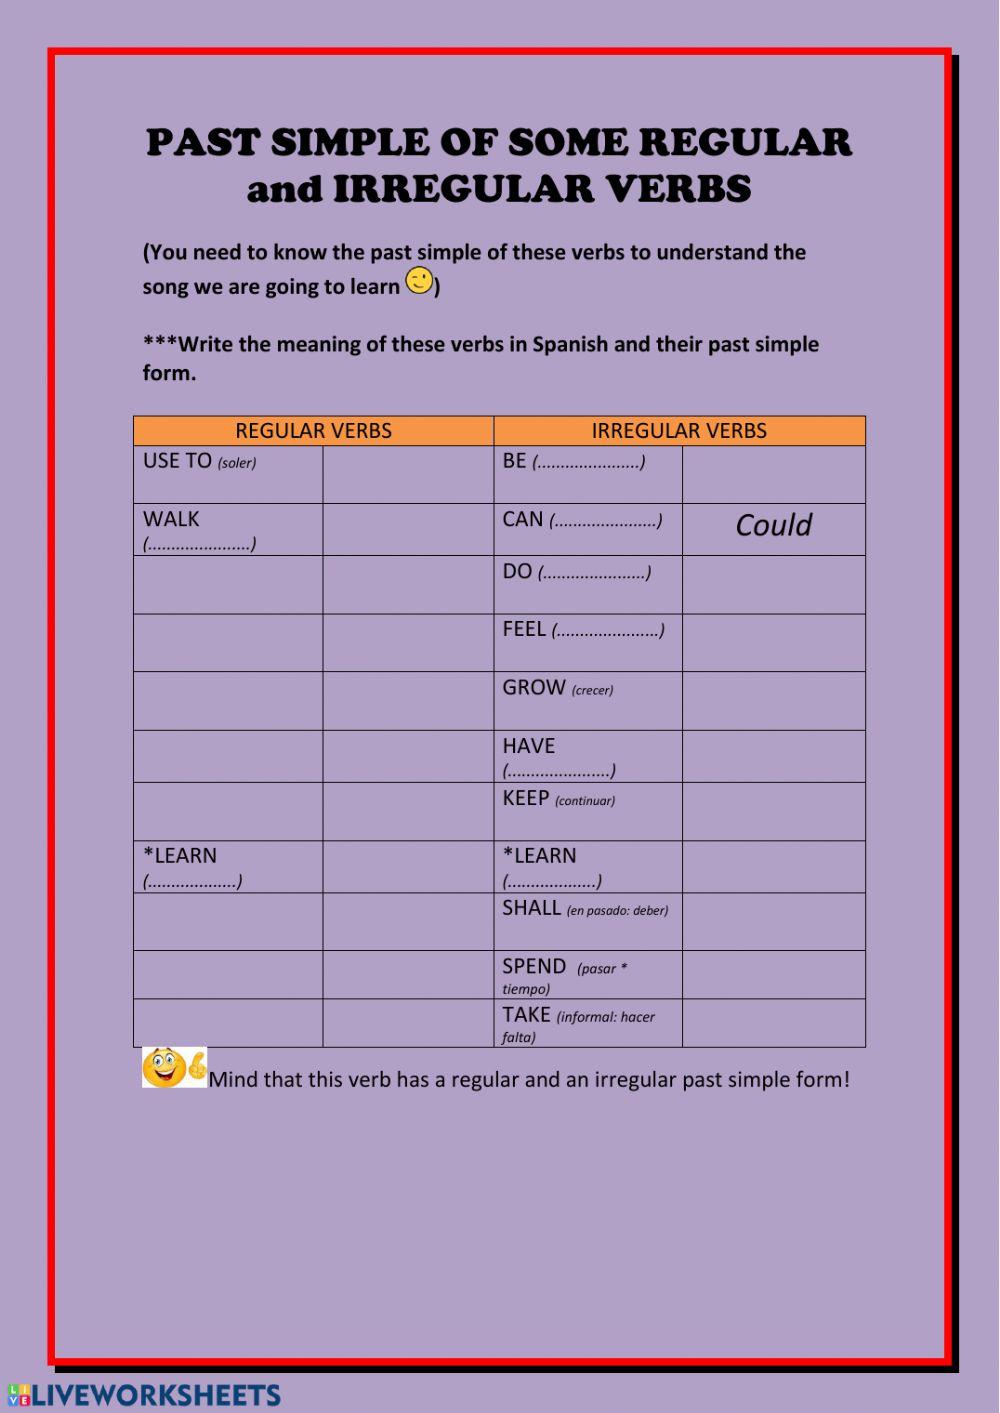 Past simple of some regular and irregular verbs